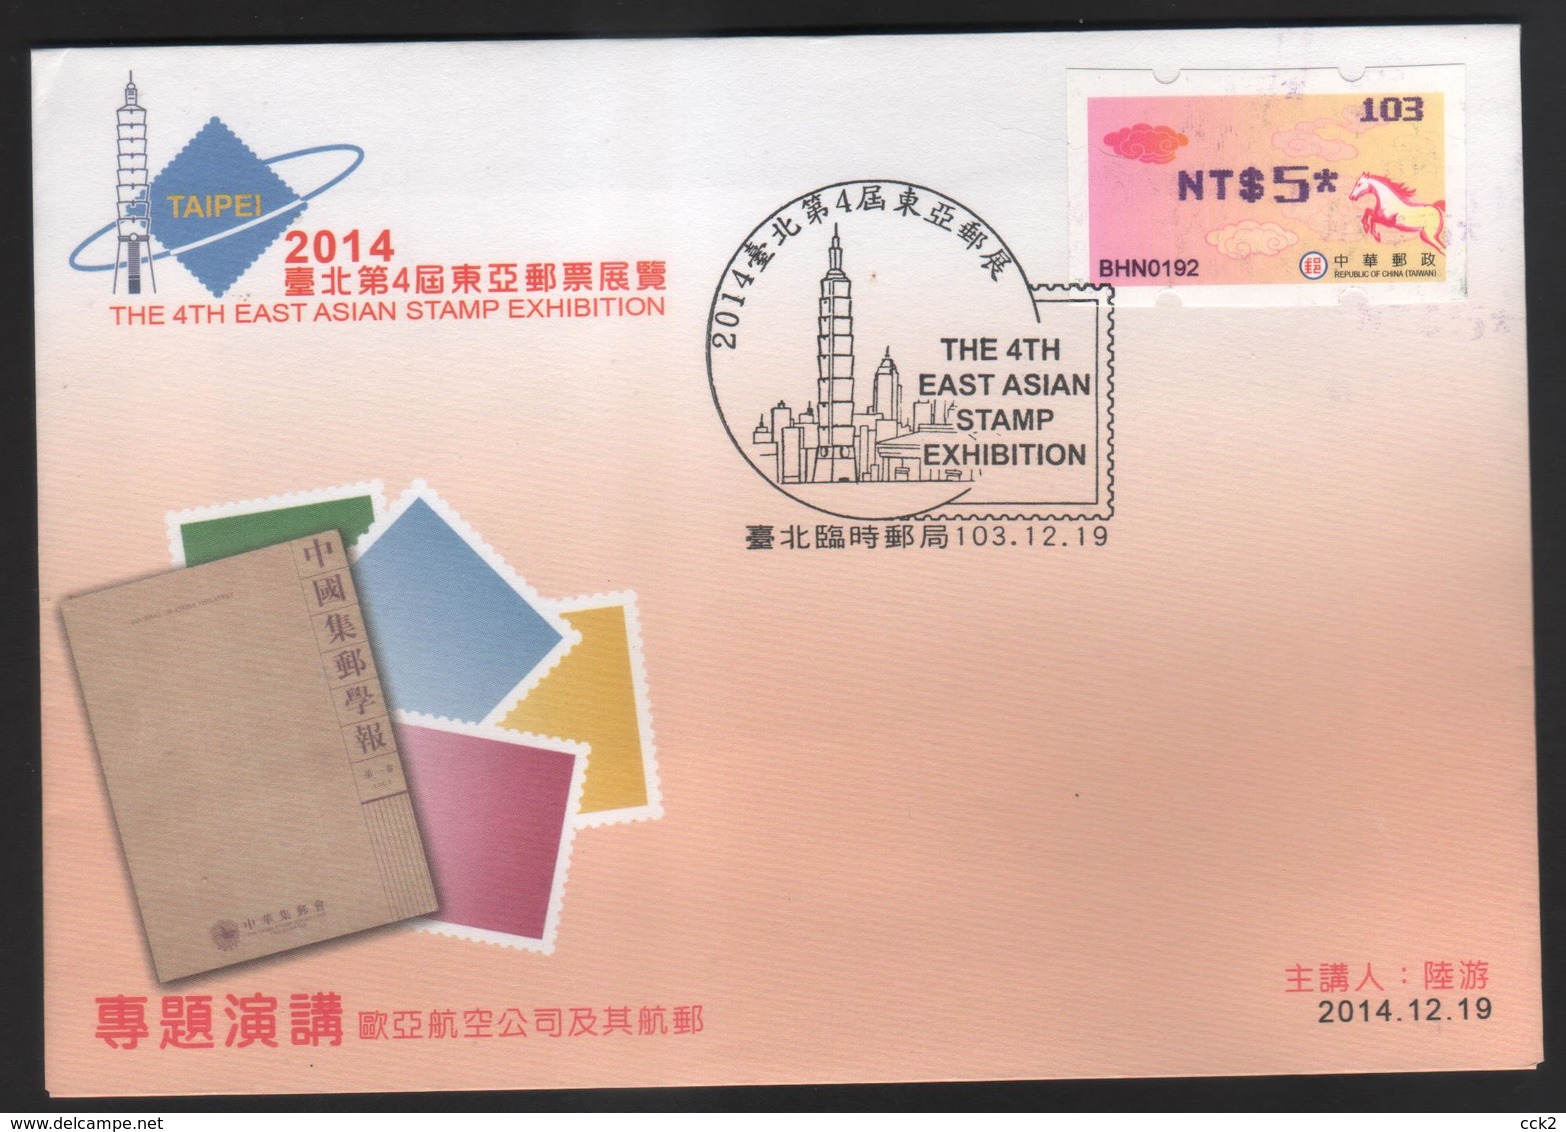 The 4th East Asian Stamp Exhibition  FDC 2014 - Vignette [ATM]